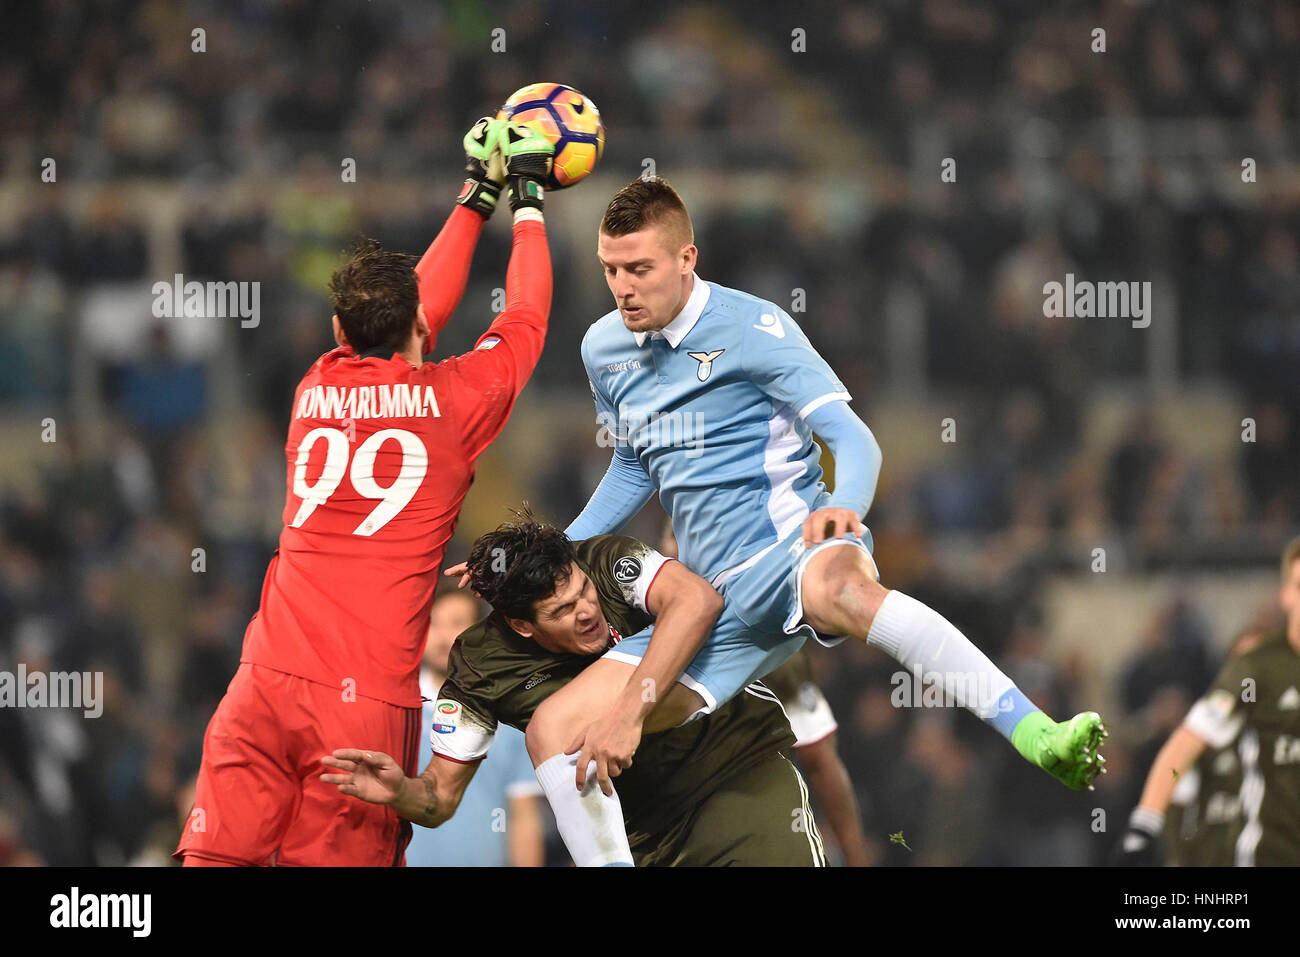 Rome, Italy. 13th Feb, 2017. :Gianluigi Donnarumma of Milan (99) in action during the serie A match between SS Lazio Vs AC Milan on February 13, 2017 in Stadio Olimpico in Rome, Italy.  Credit: marco iorio/Alamy Live News Stock Photo